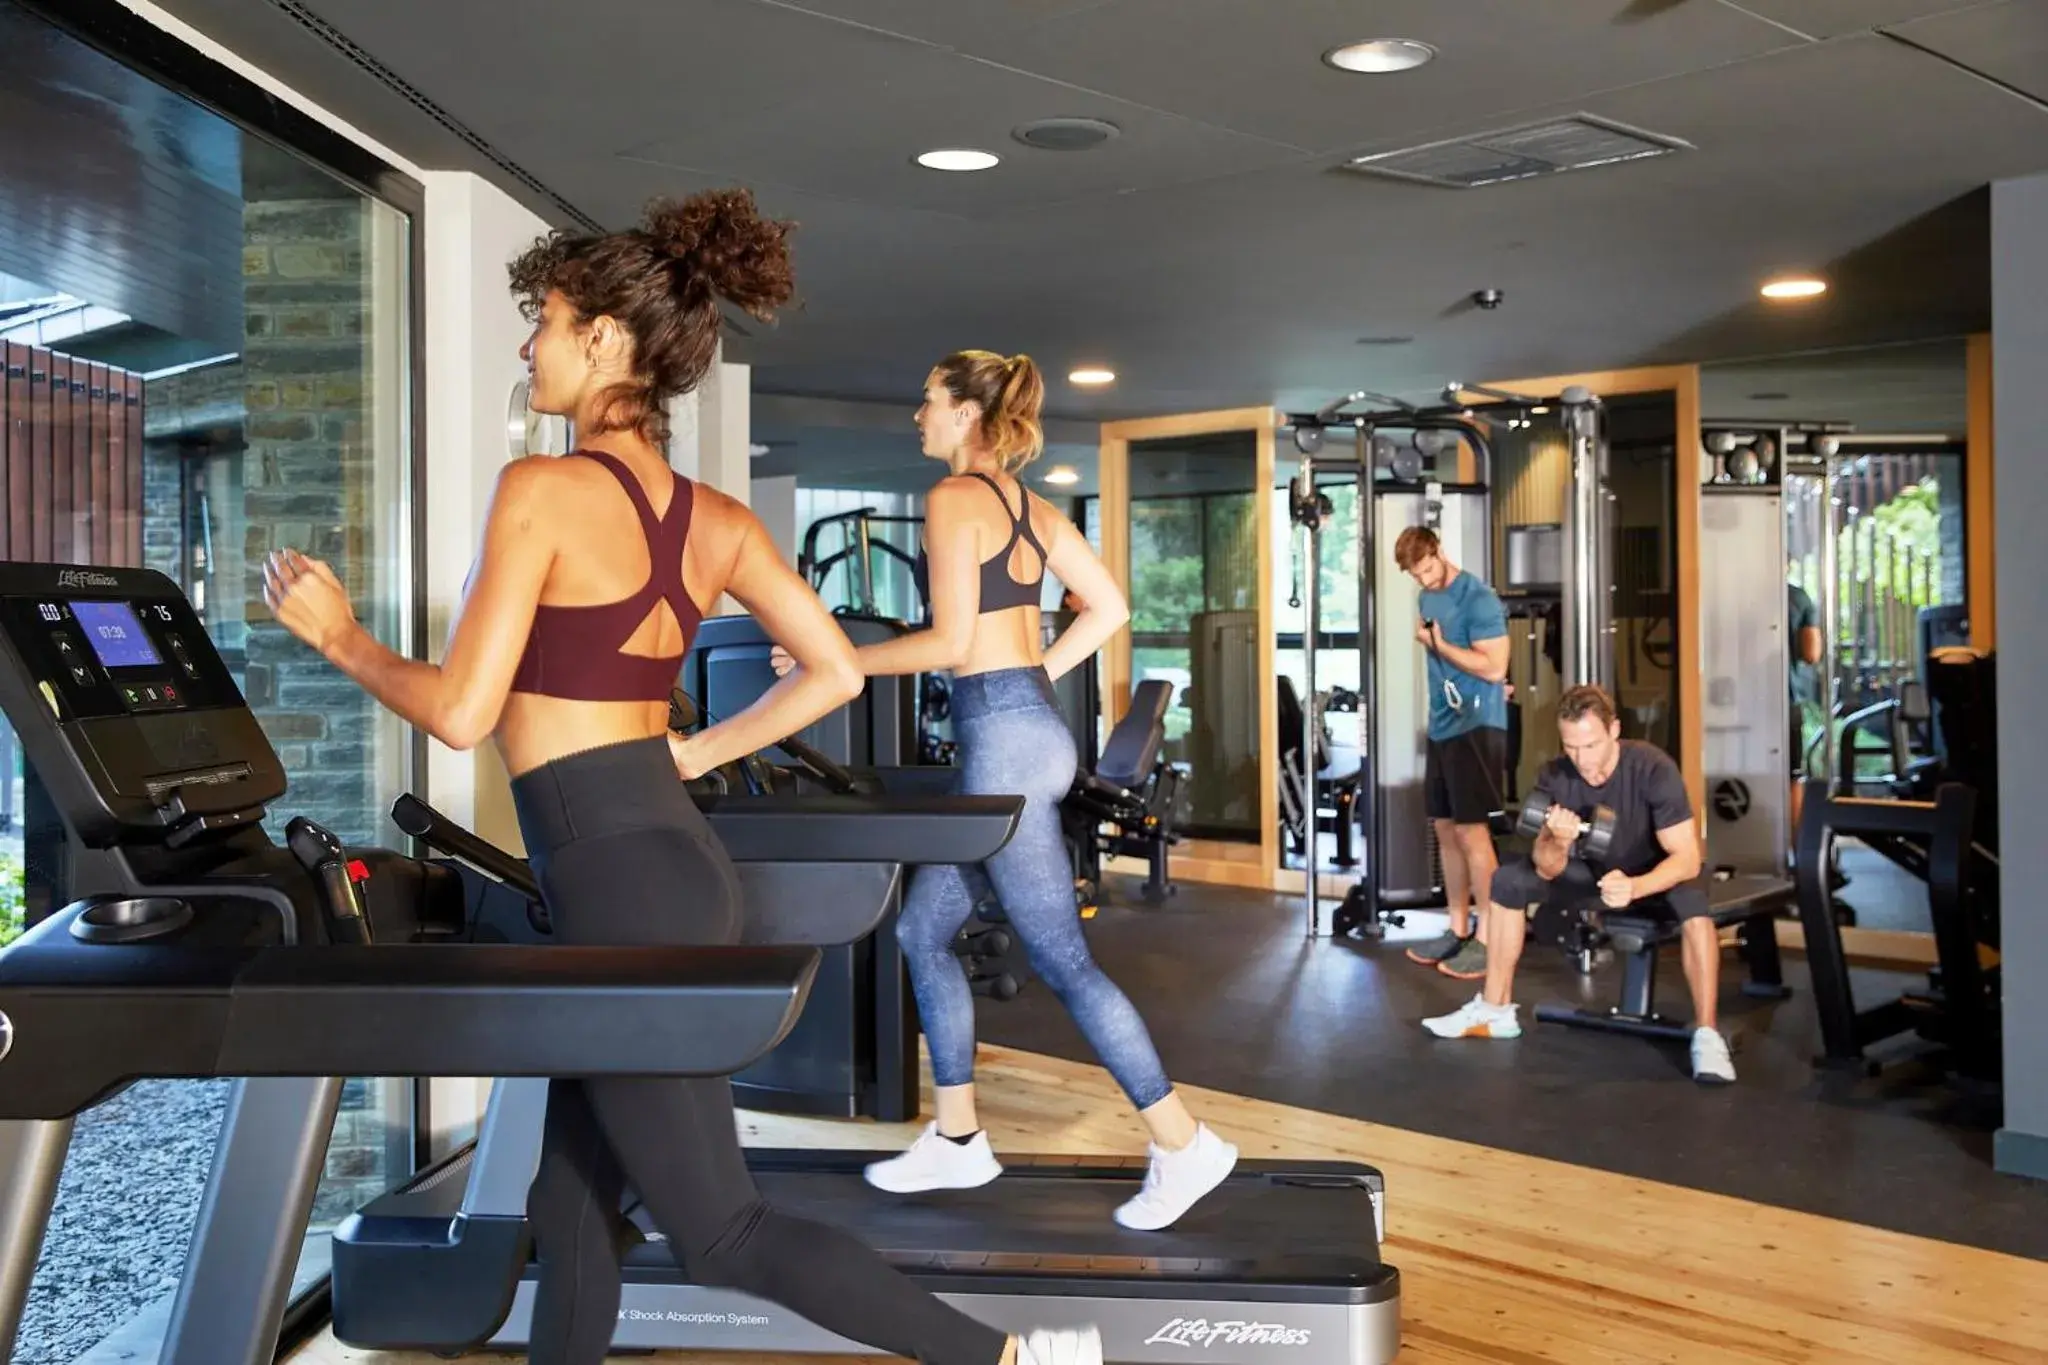 Fitness centre/facilities, Fitness Center/Facilities in Park Piolets MountainHotel & Spa